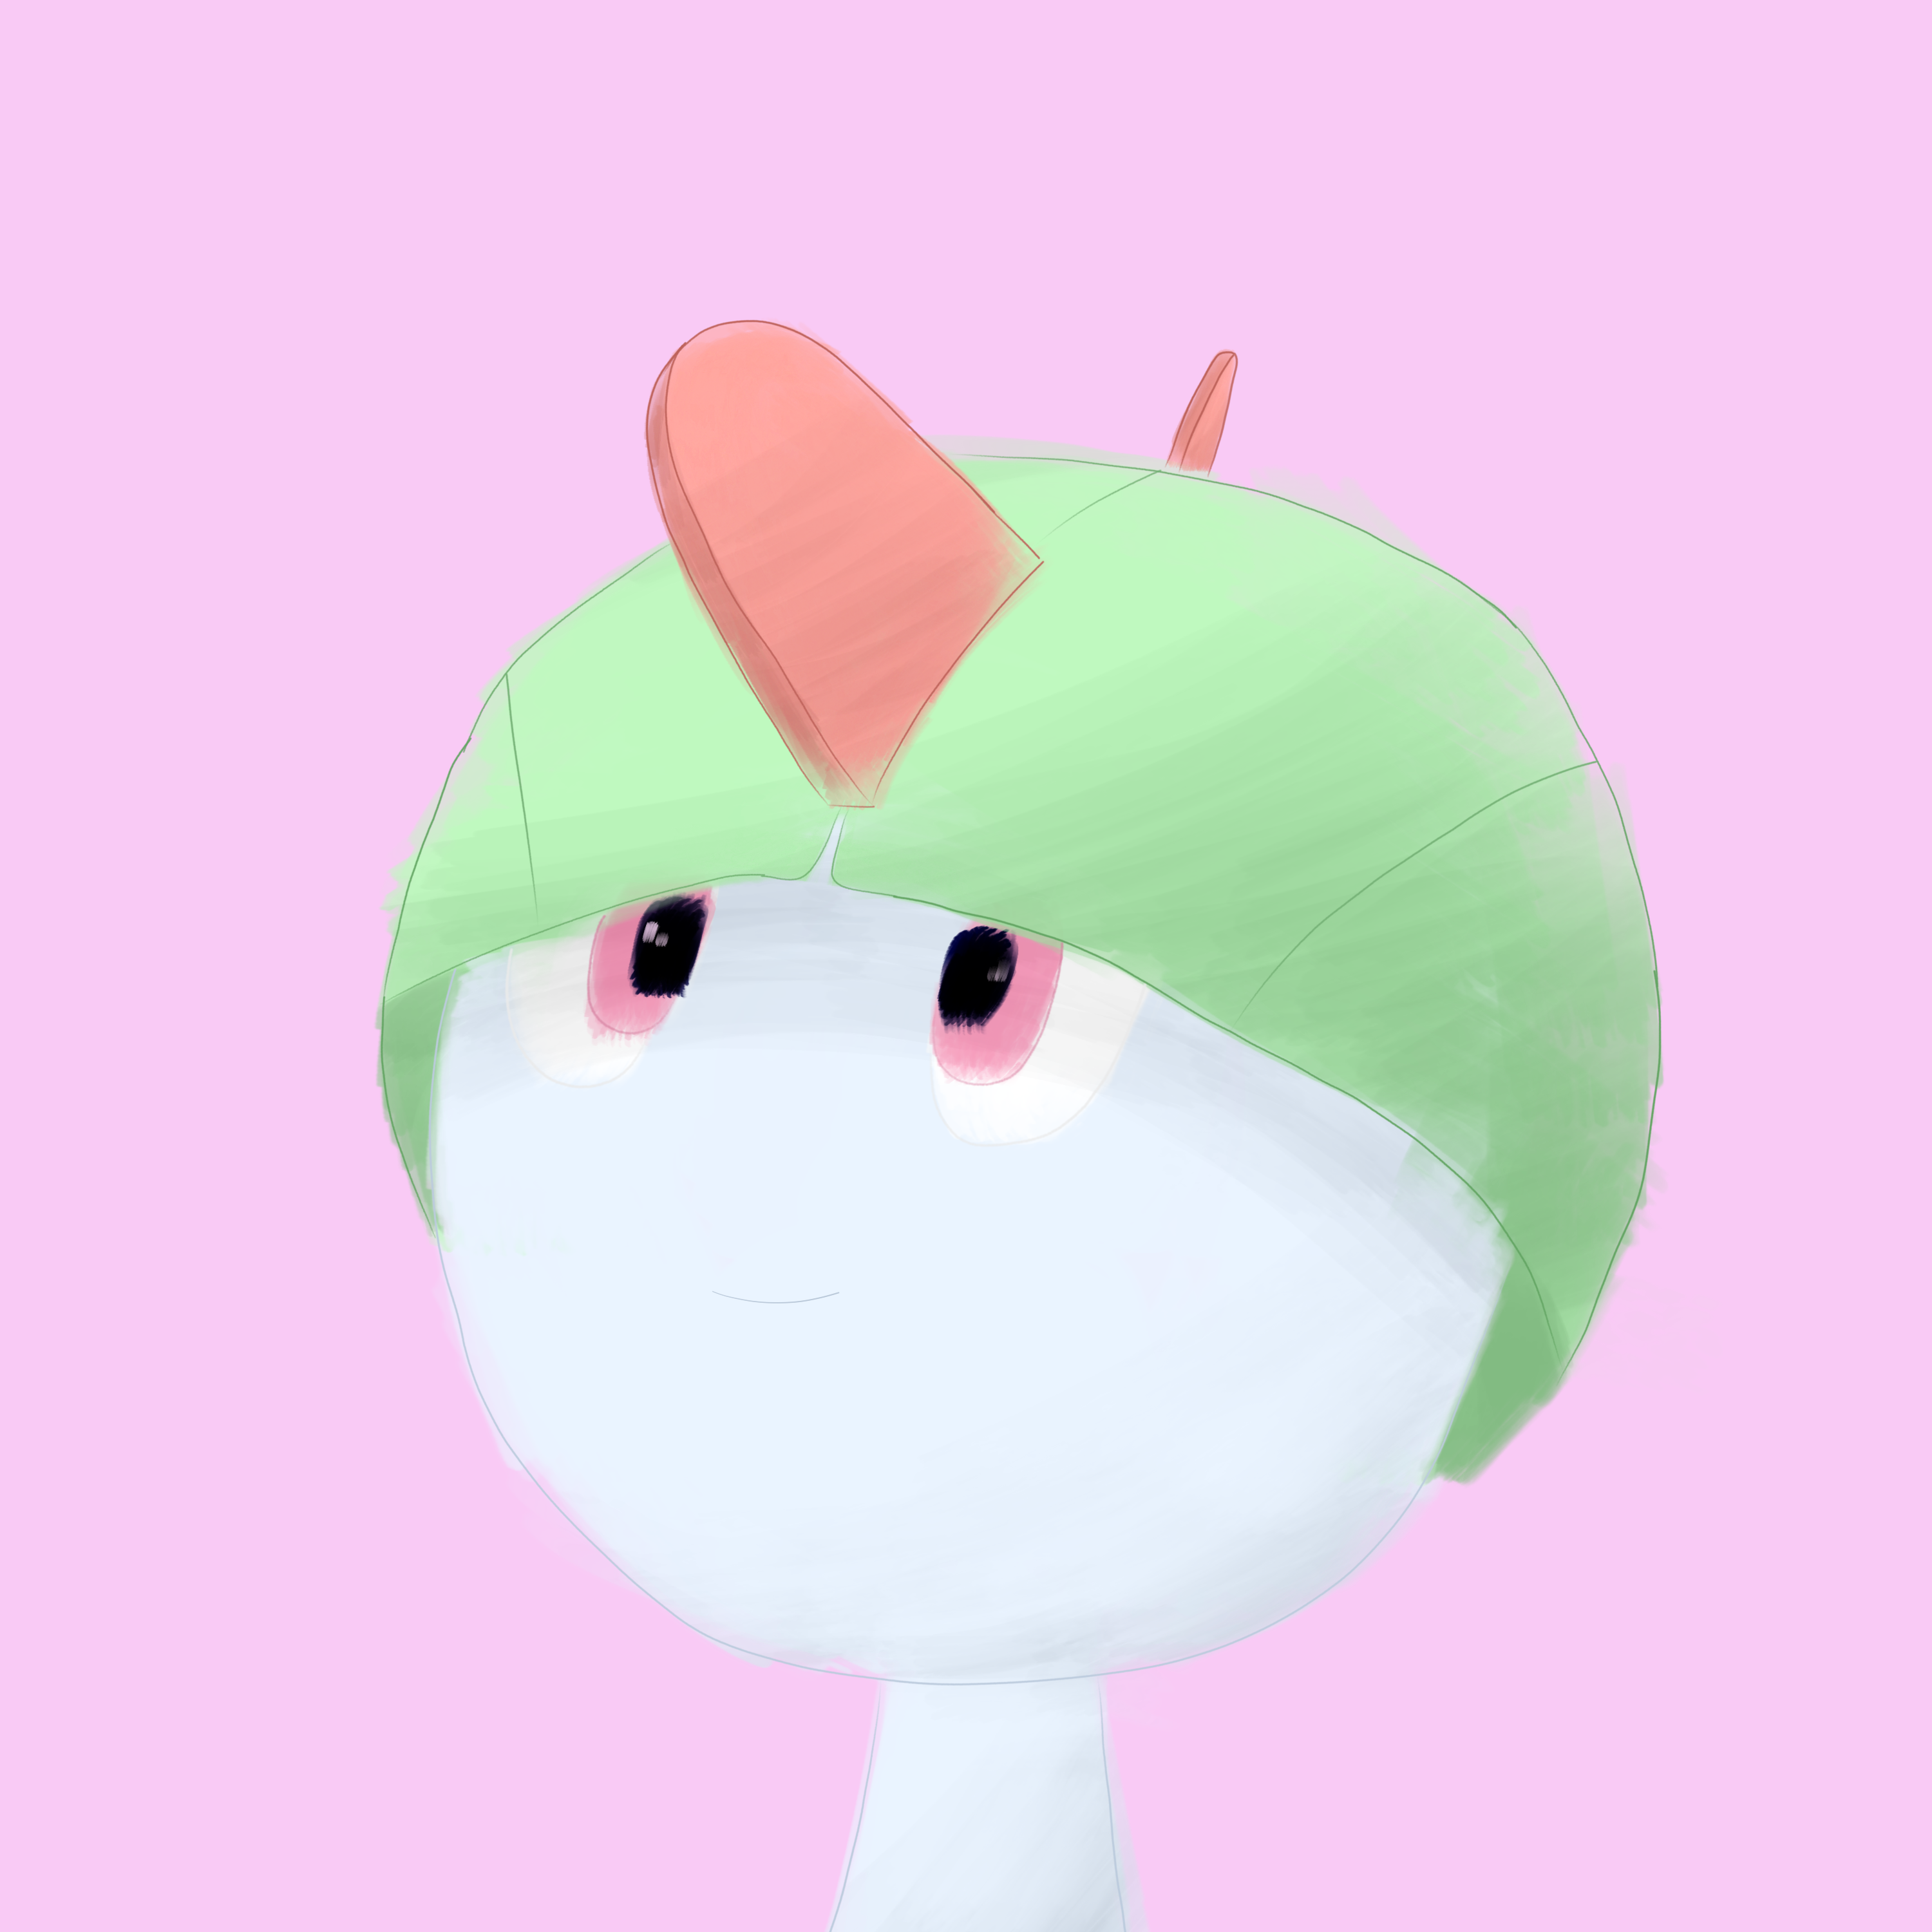 i like ralts i named my ralts in pokemon sword and shield salad because his head looks like a salad bowl